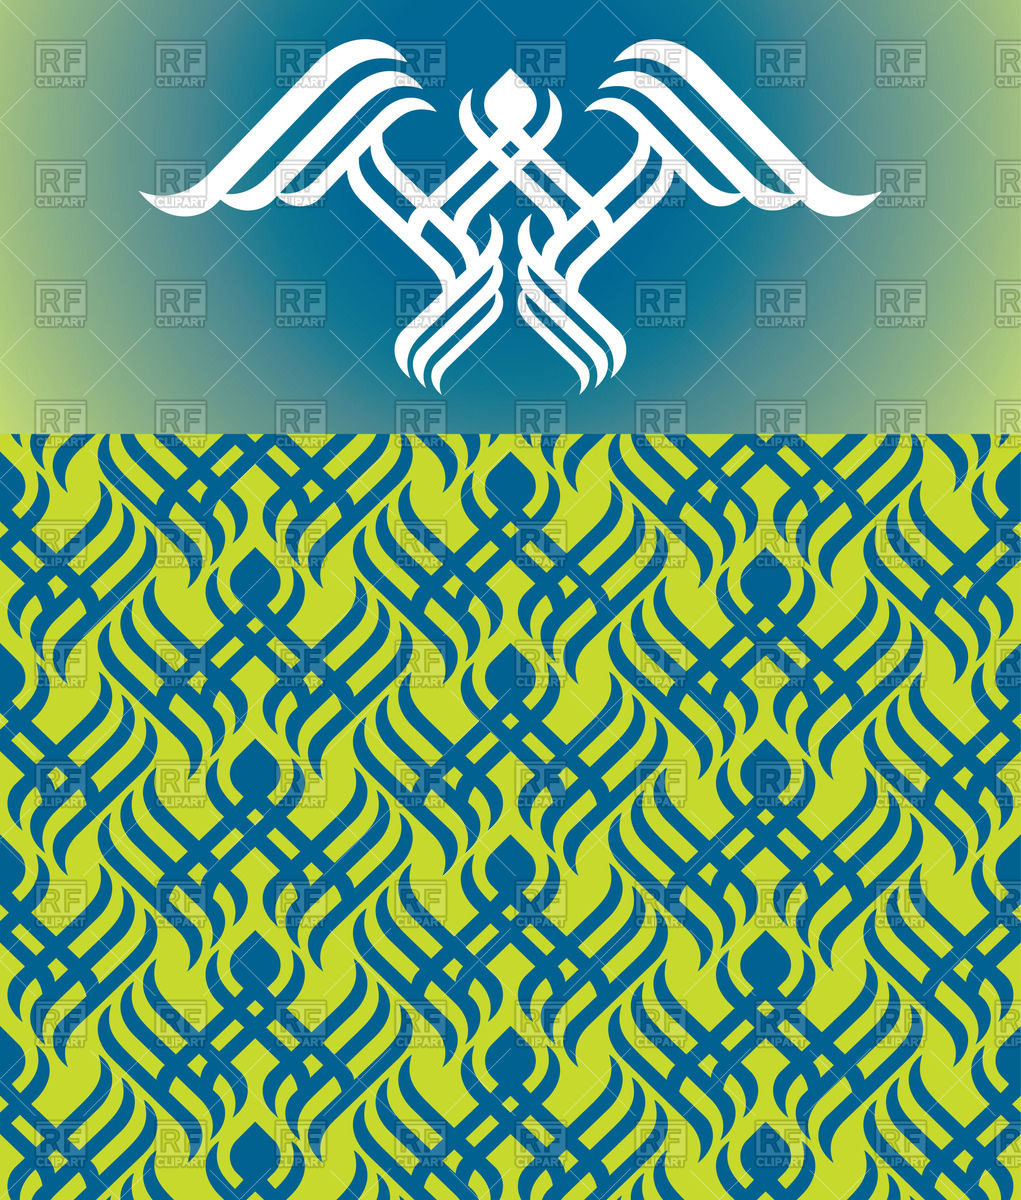 Seamless Blue And Yellow Damask Background Royalty